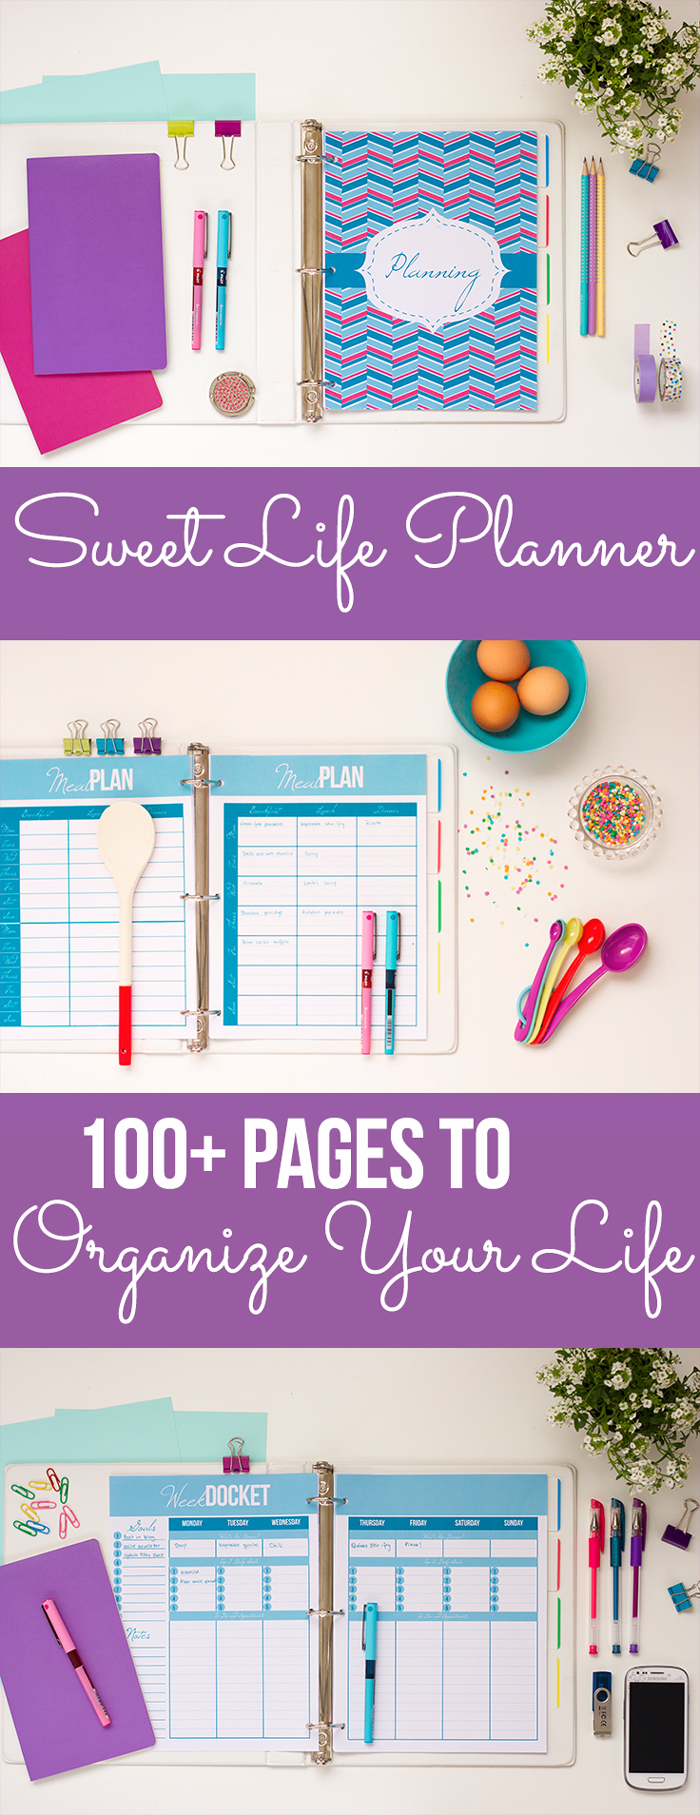 Complete set of printables to organize your home and life - includes goal setting, planning, cleaning, meal planning, finances, and more!